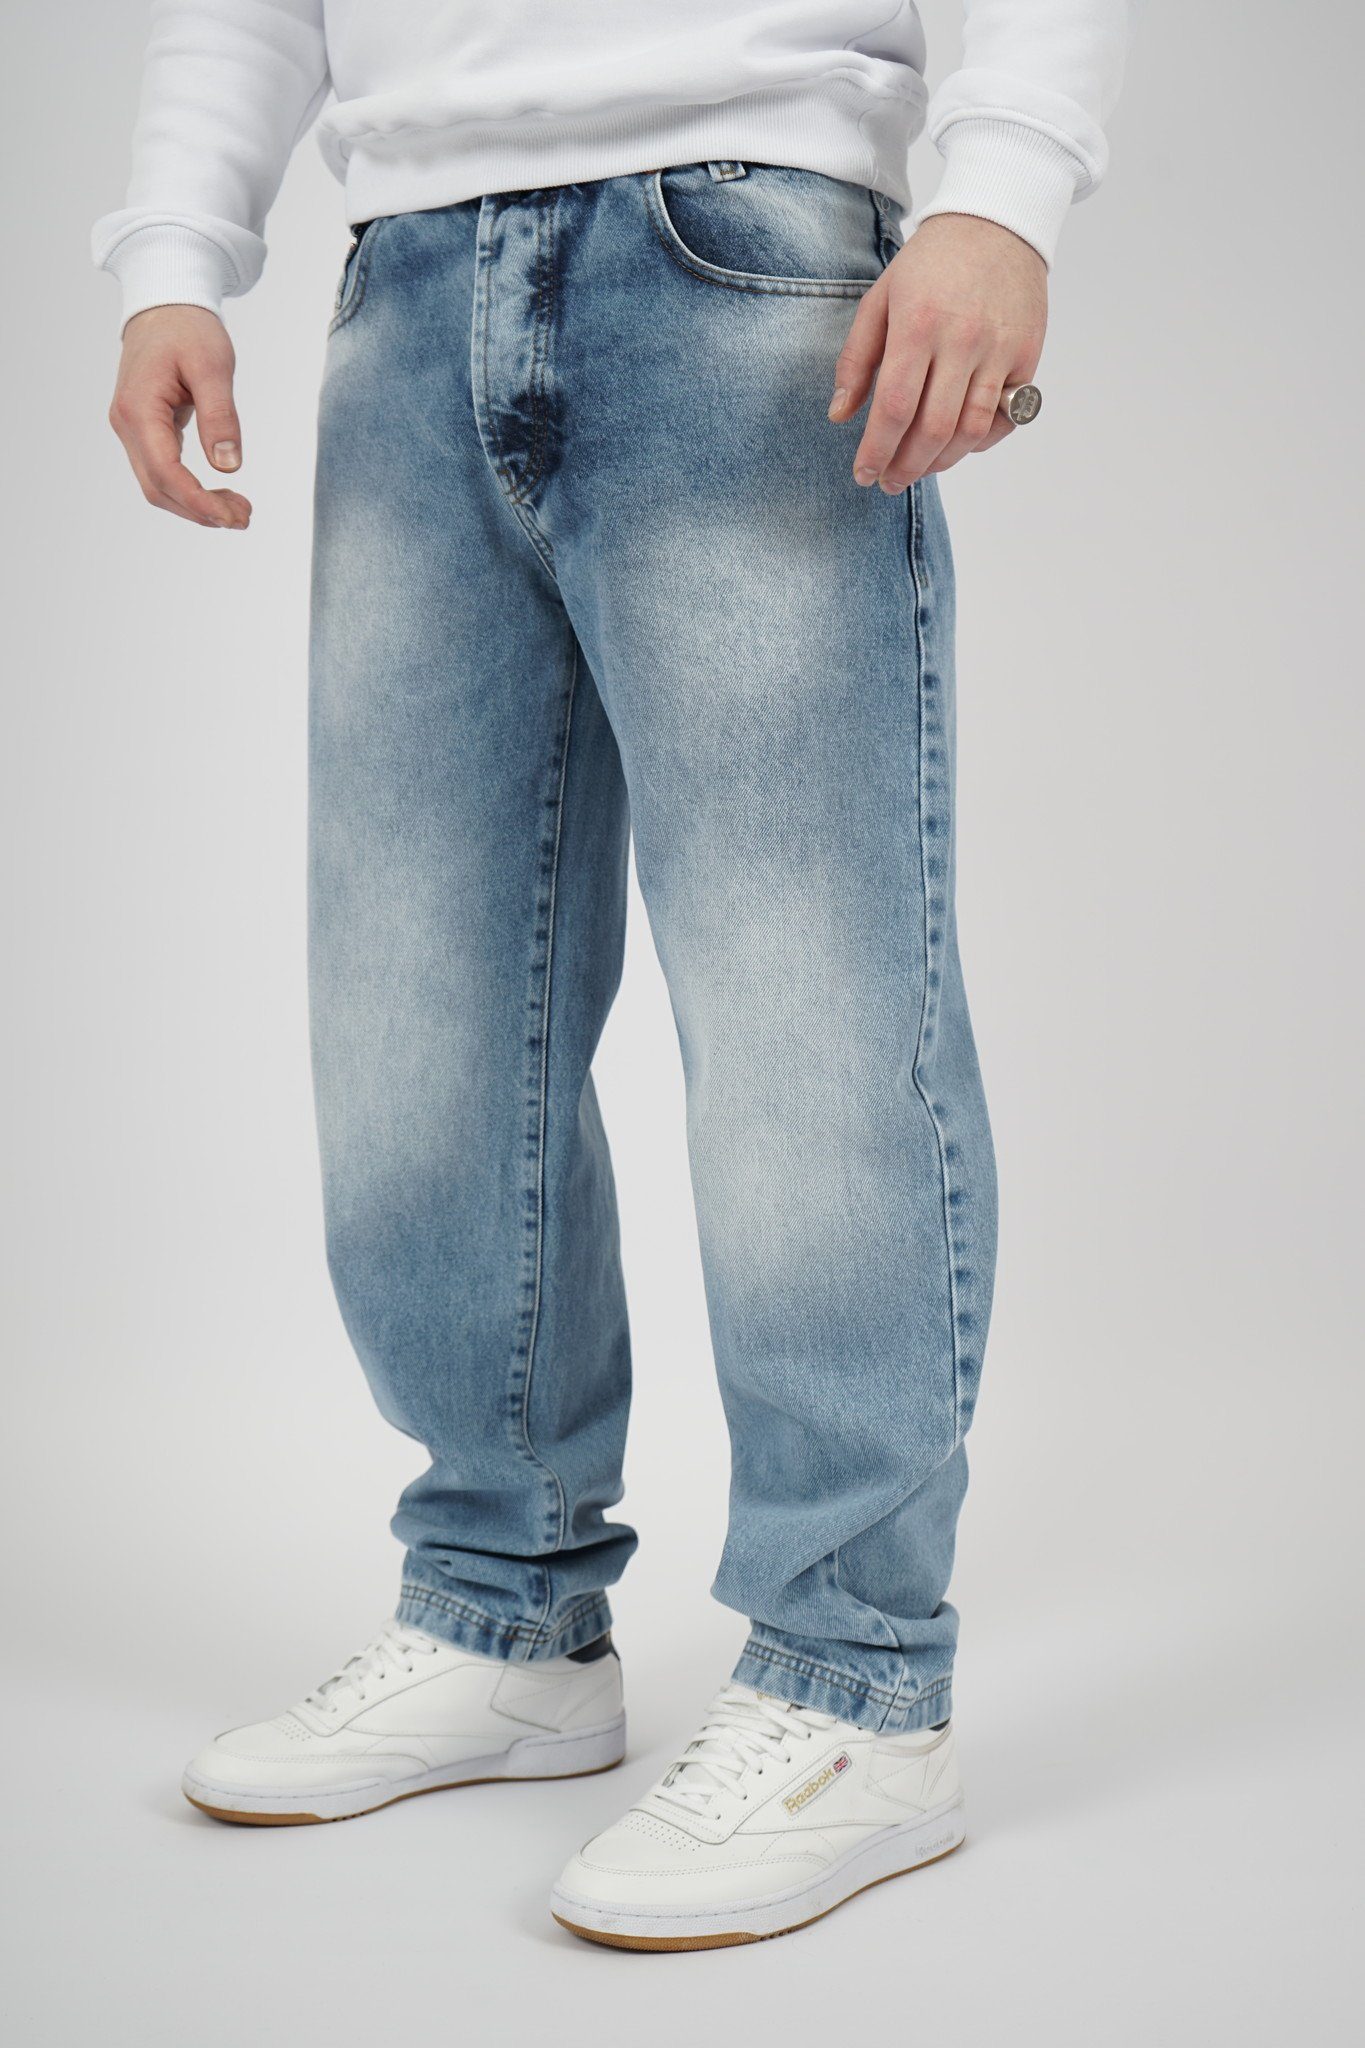 PICALDI Jeans Weite Jeans Zicco 472 Cali Loose Fit, Relaxed Fit